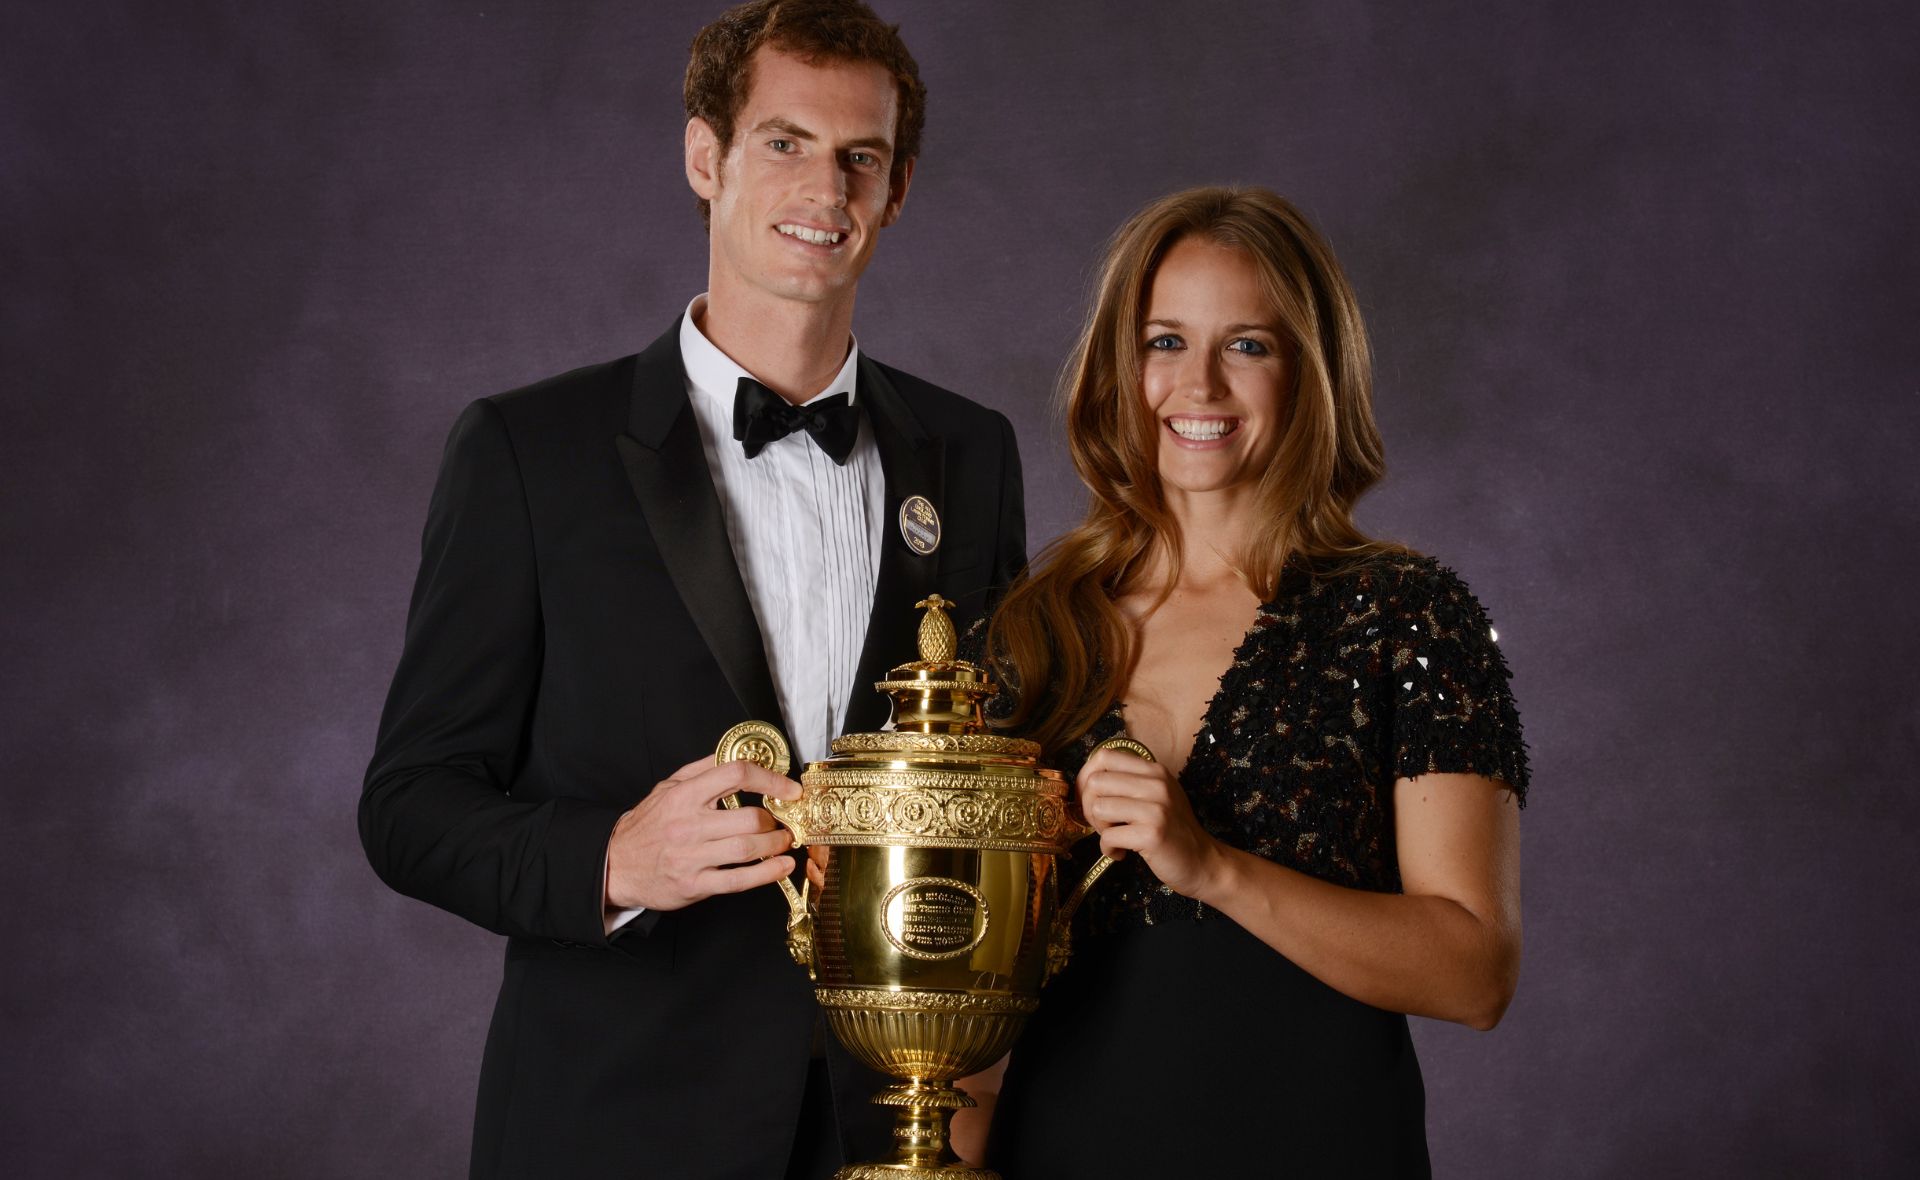 The gorgeous tennis WAG Kim Sears, Andy Murray’s wife